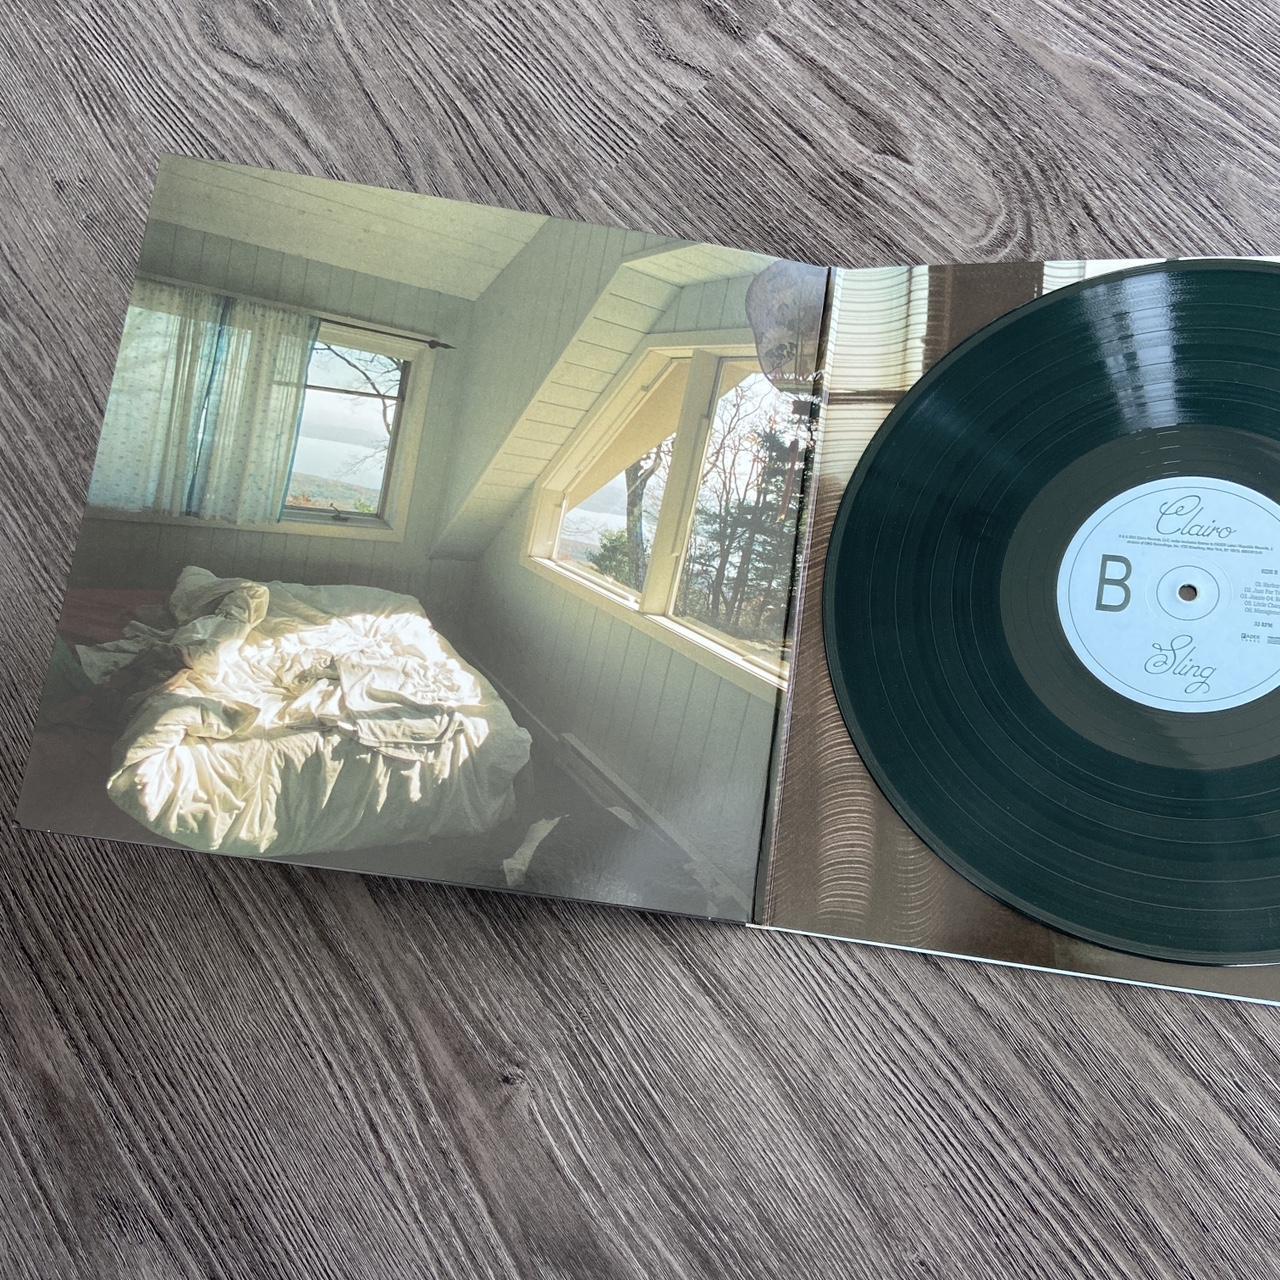 Clairo Sling vinyl in green - gorgeous record,